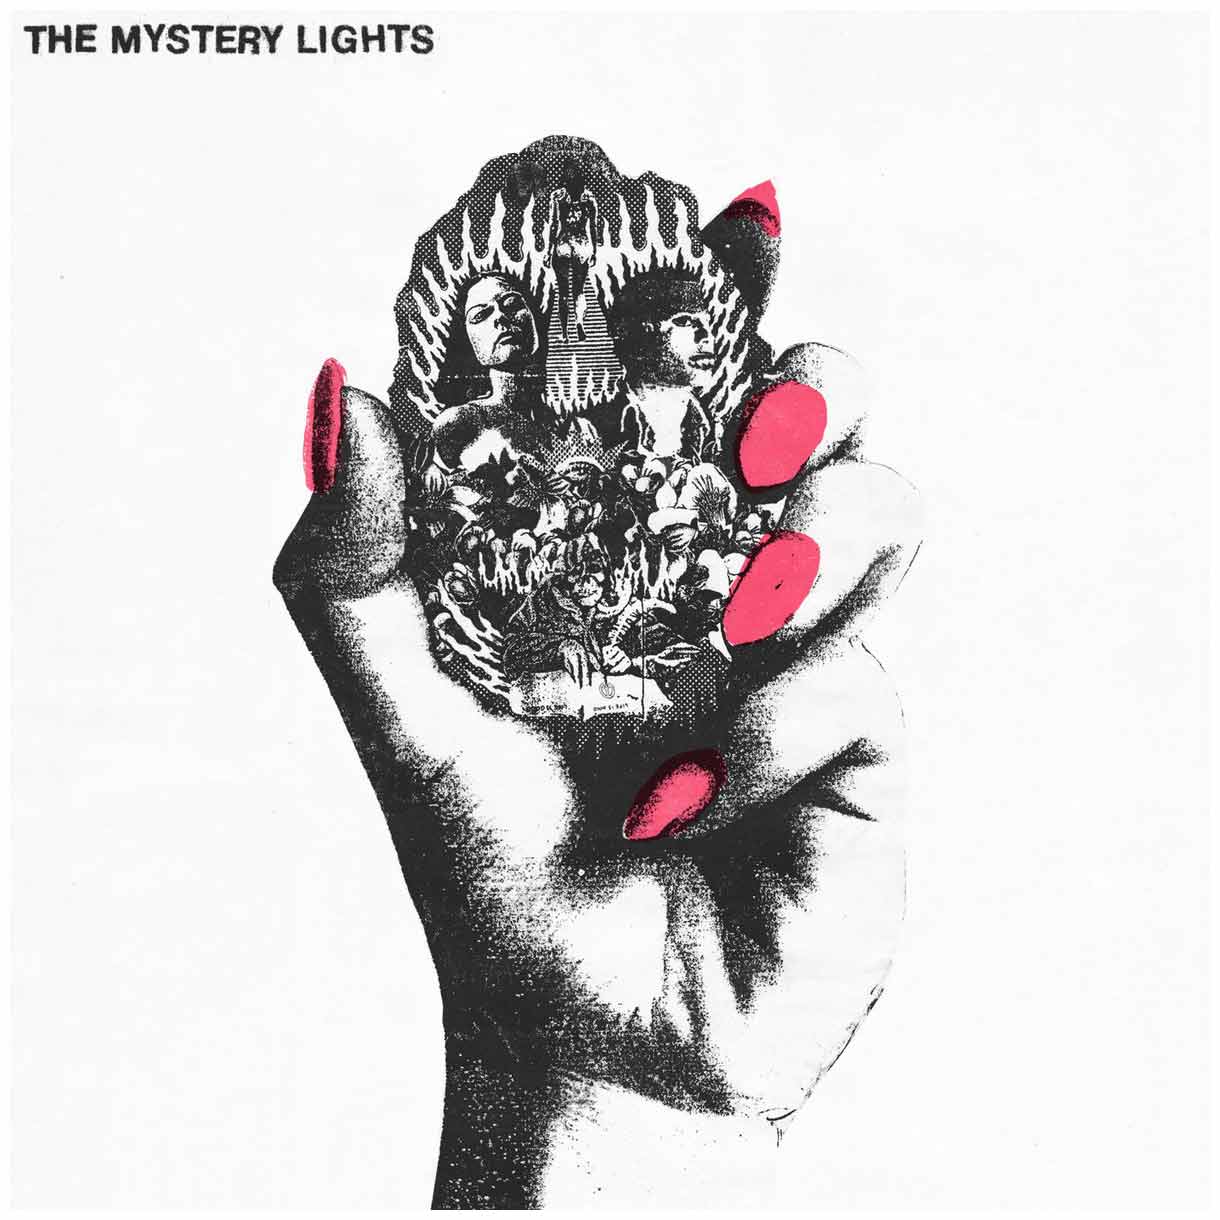 THE MISTERY LIGHTS "The Mystery Lights"